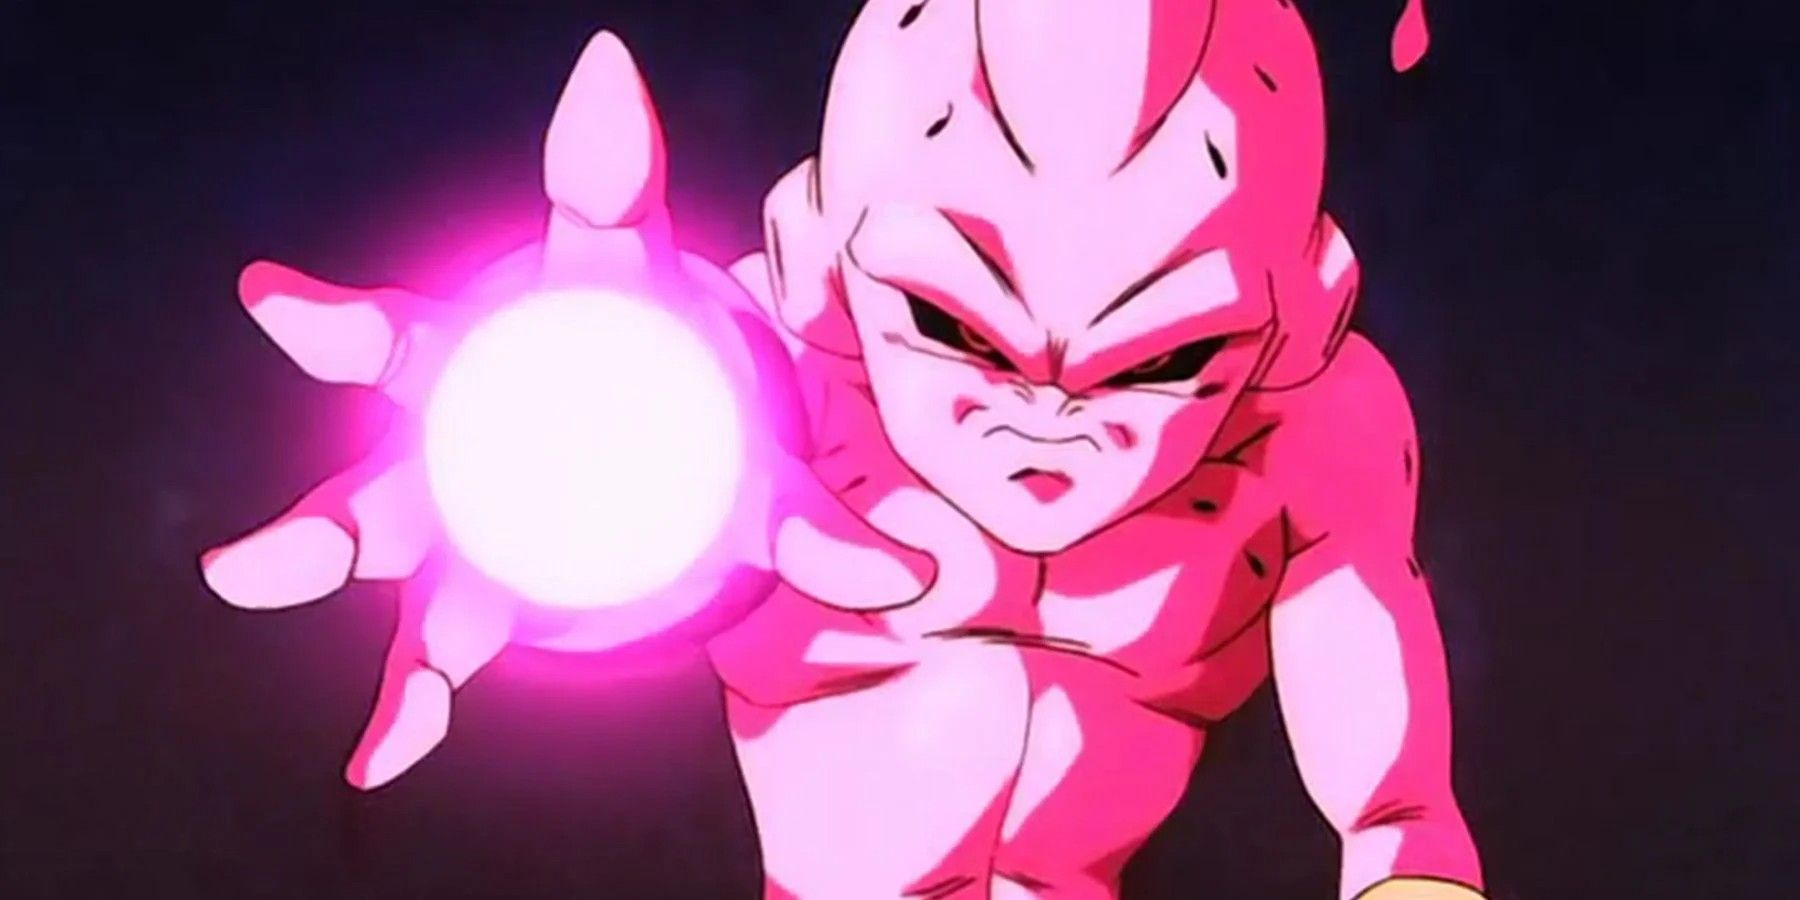 Since Uub is the reincarnation of Kid Buu, do you think that he